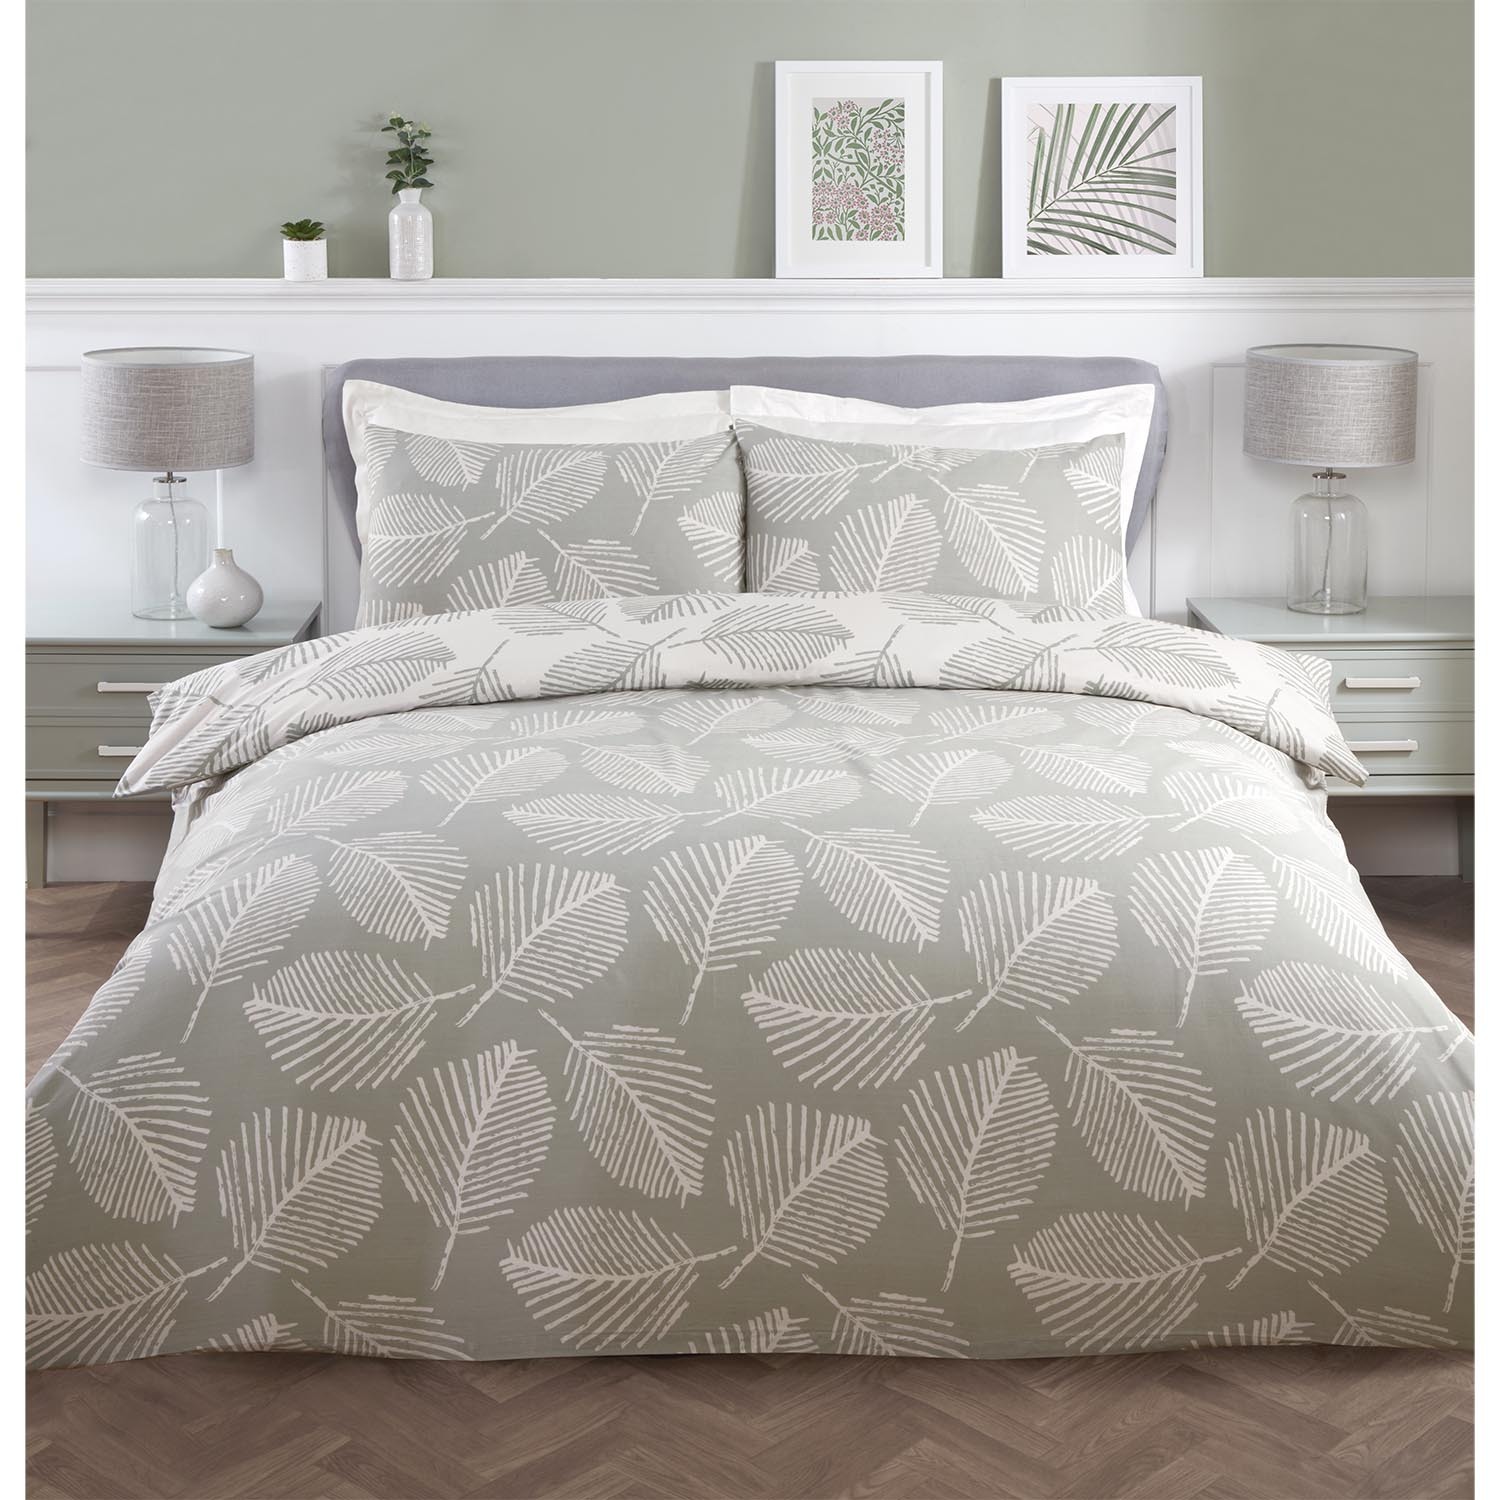 Falling Leaves Duvet Cover and Pillowcase Set - Green and White / Single Image 1